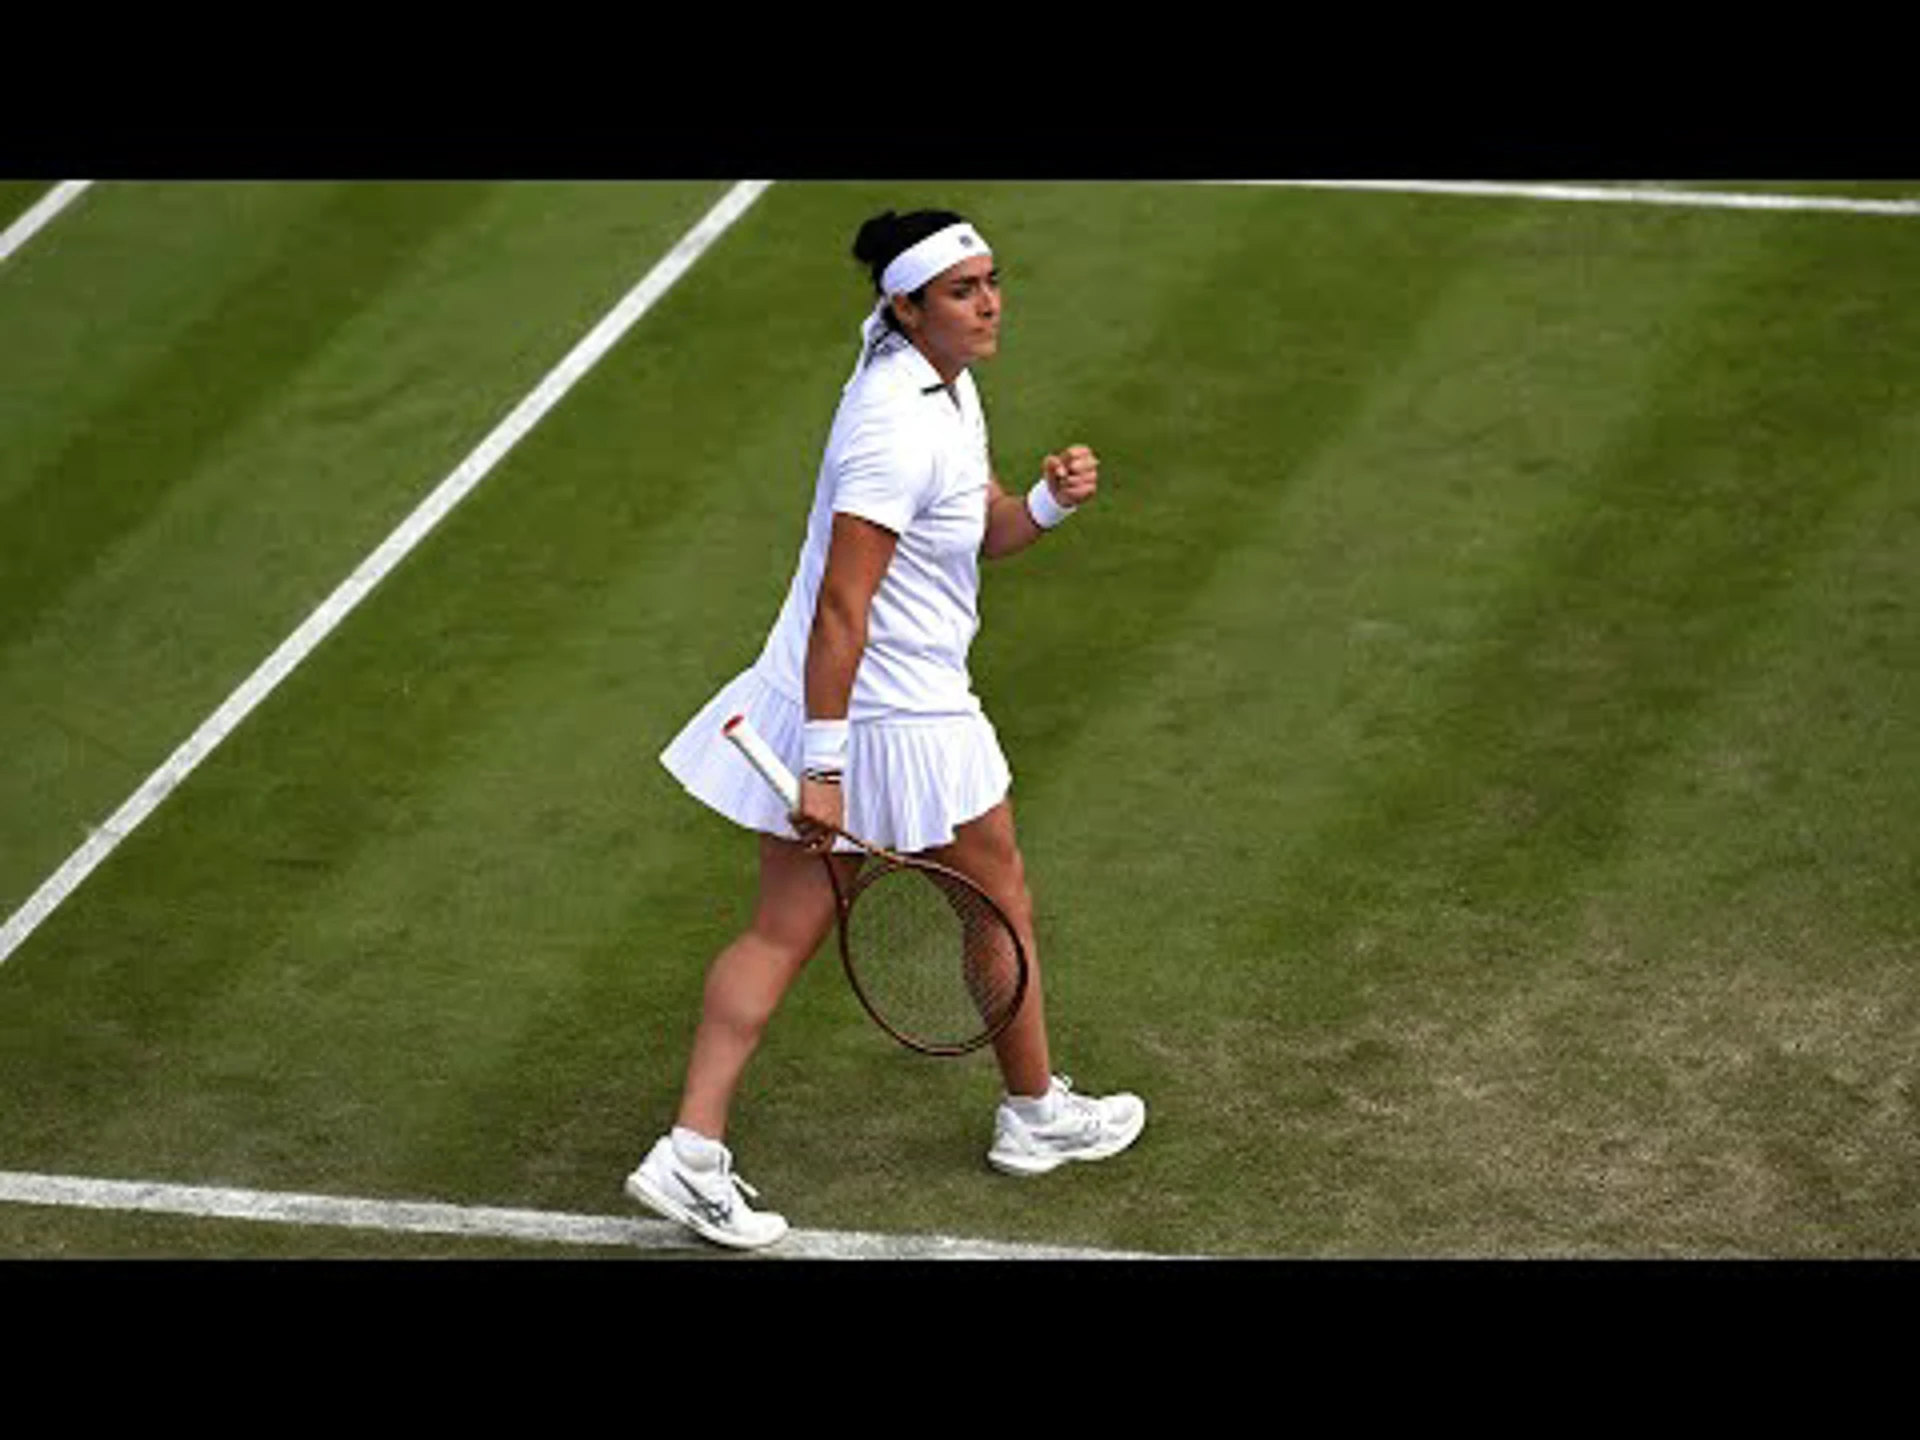 Ons Jabeur v Robin Montgomery | Women's singles | 2nd Round | Highlights | Wimbledon